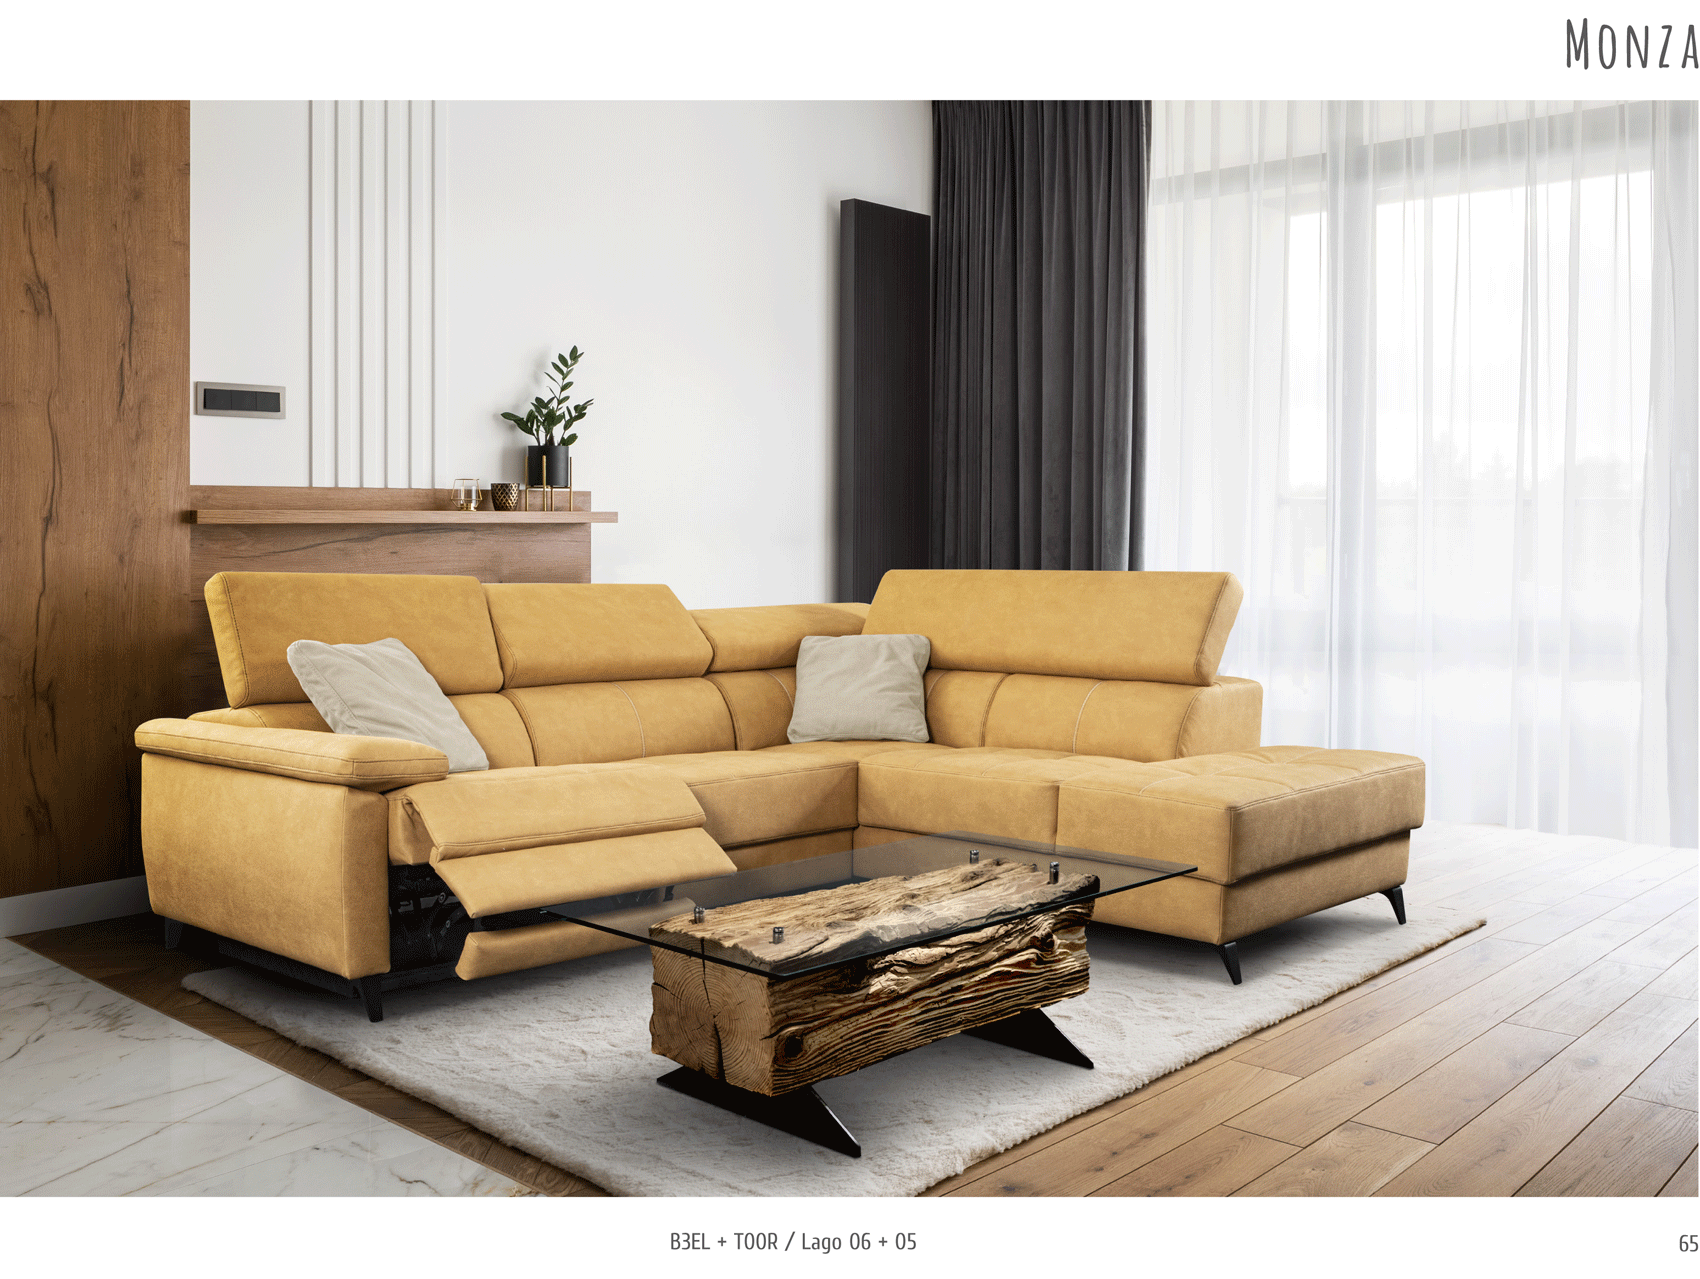 Living Room Furniture Sleepers Sofas Loveseats and Chairs Monza Sectional w/Recliner